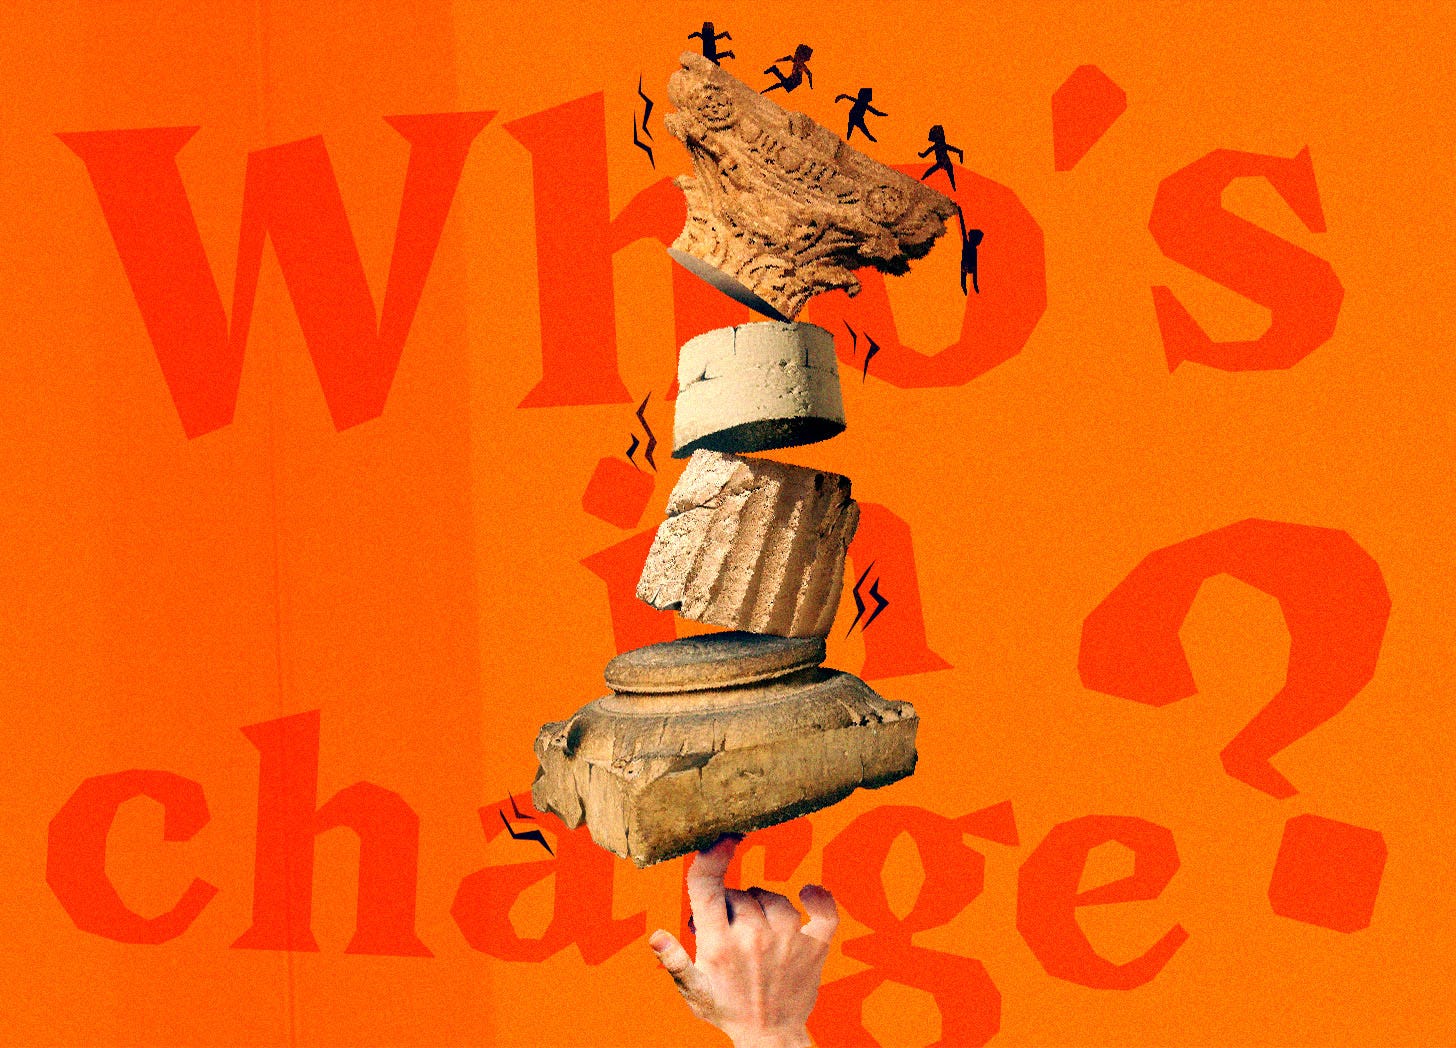 A photo illustration of a hand holding up a wobbly column, in four stacked pieces, with one finger. There are hand-drawn motion lines and some stick figure-like characters being jostled at the top. In the background, large type says “Who’s in charge?” in orange on an orange background.